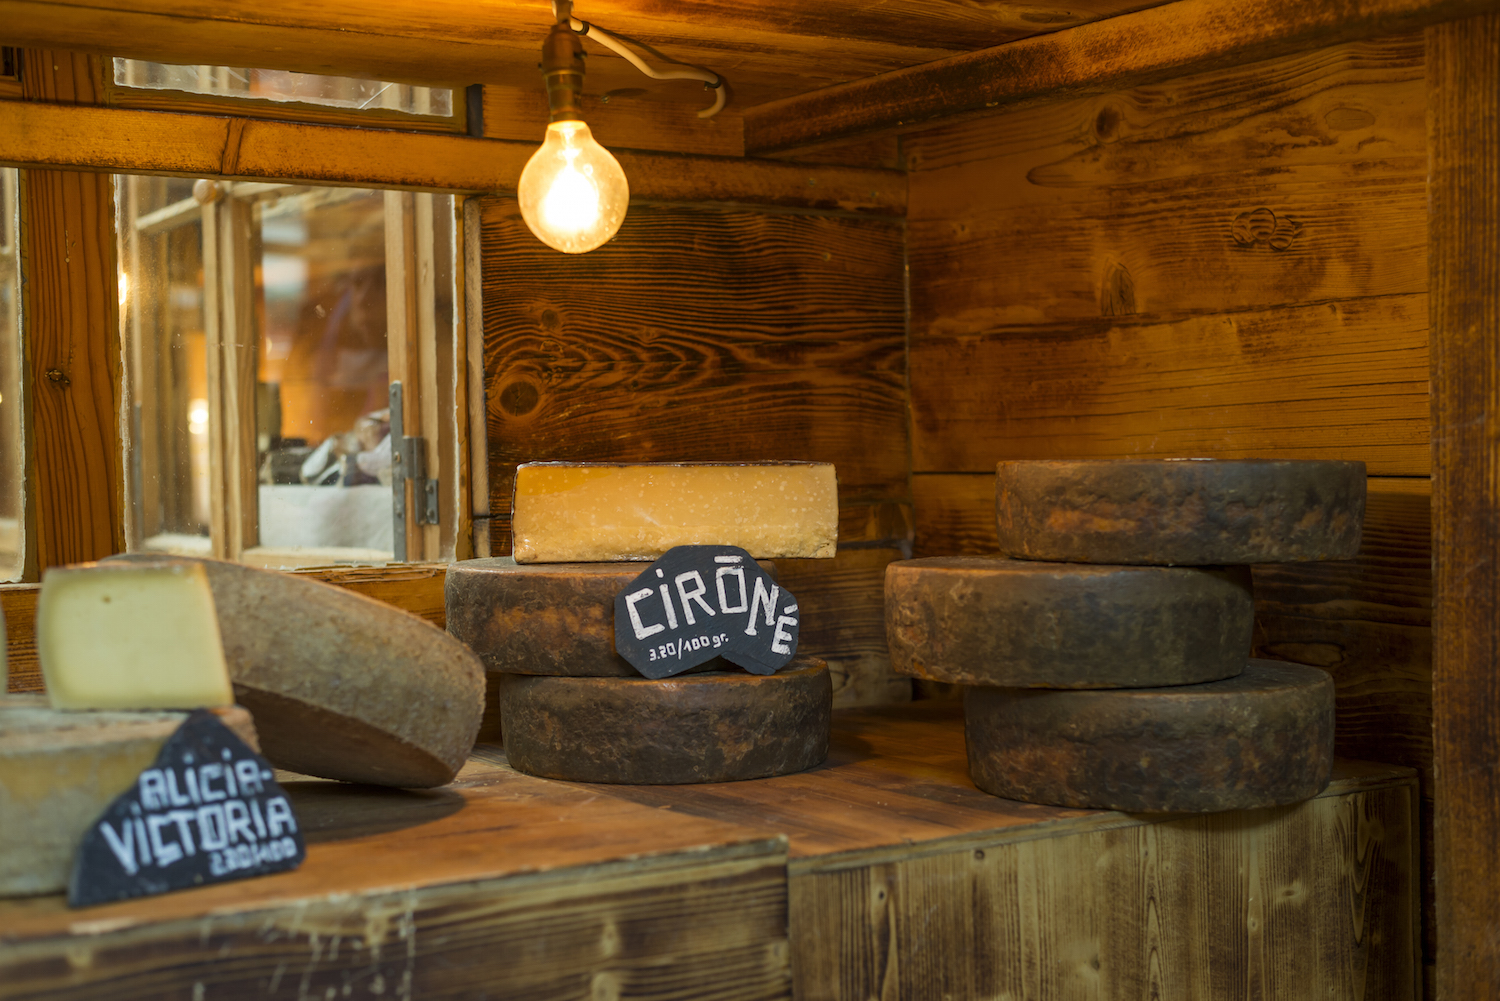 Gourmet cheese for sale at Borough Market.jpg